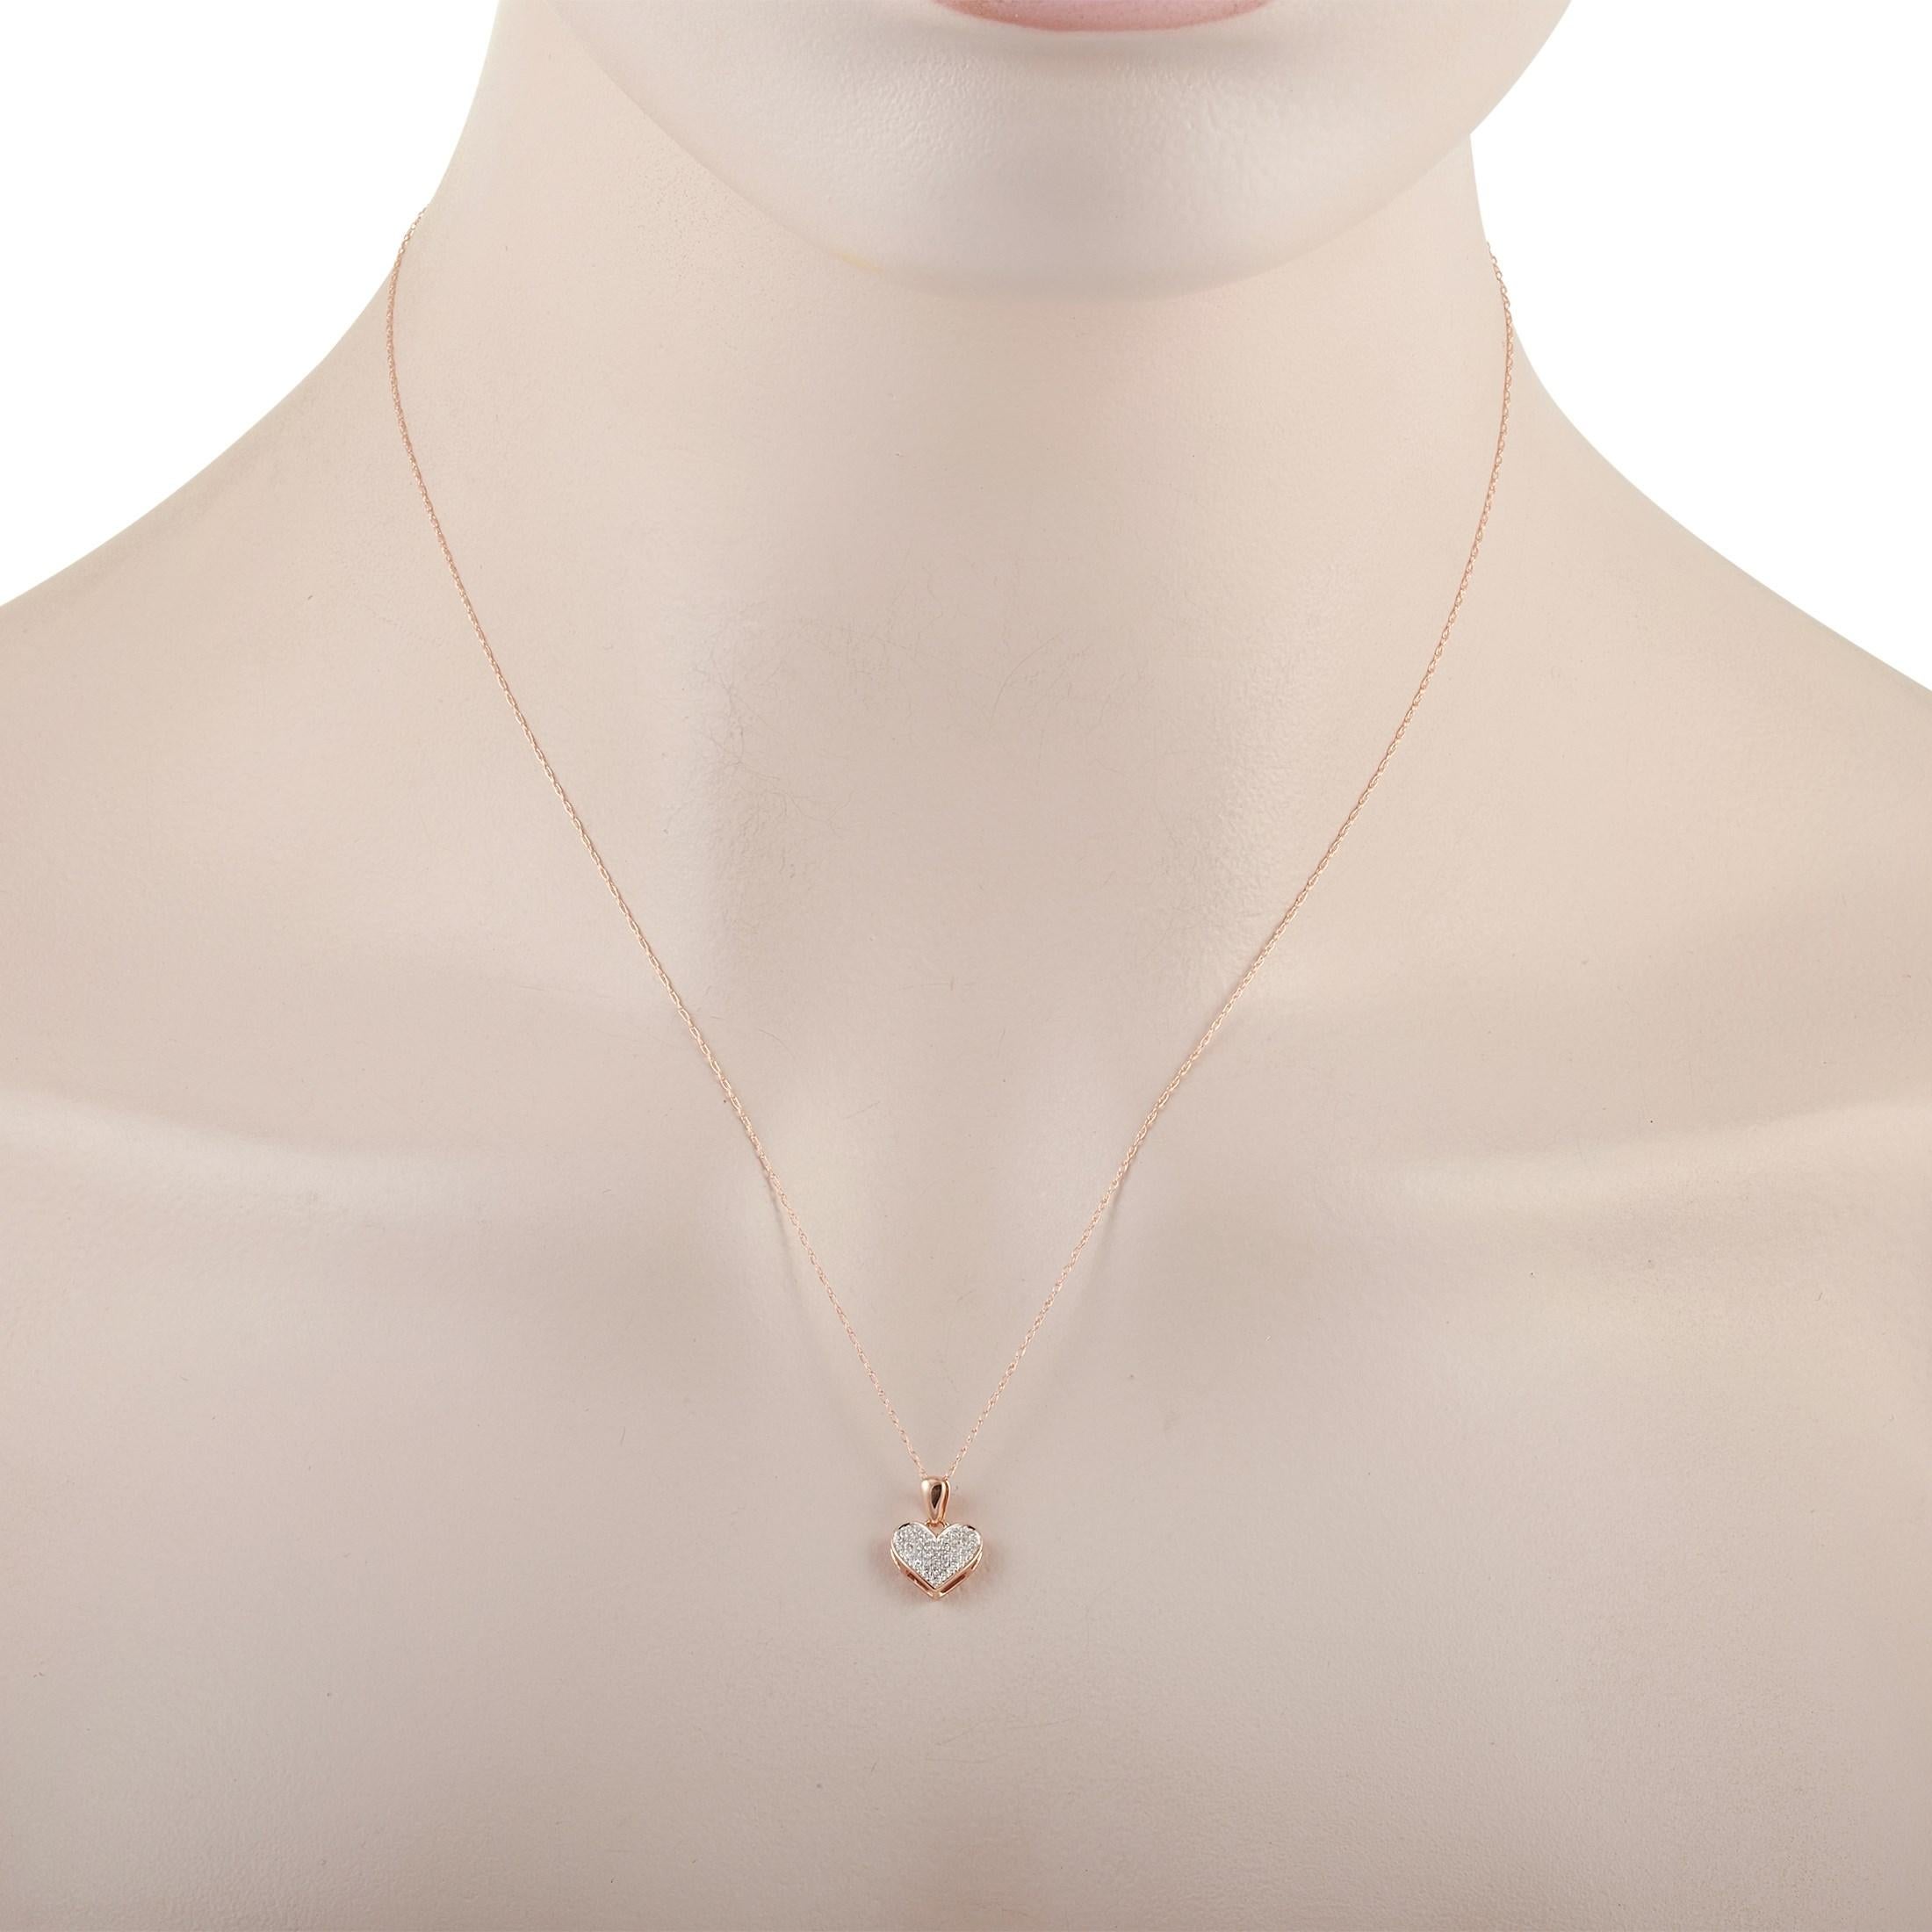 The LB Exclusive 14K Rose Gold 0.08 ct Diamond Heart Pendant Necklace features a delicate 14K Rose Gold chain that is 18 inches in length and includes a matching rose gold heart pendant set with 0.08 carats of round cut diamonds. The pendant